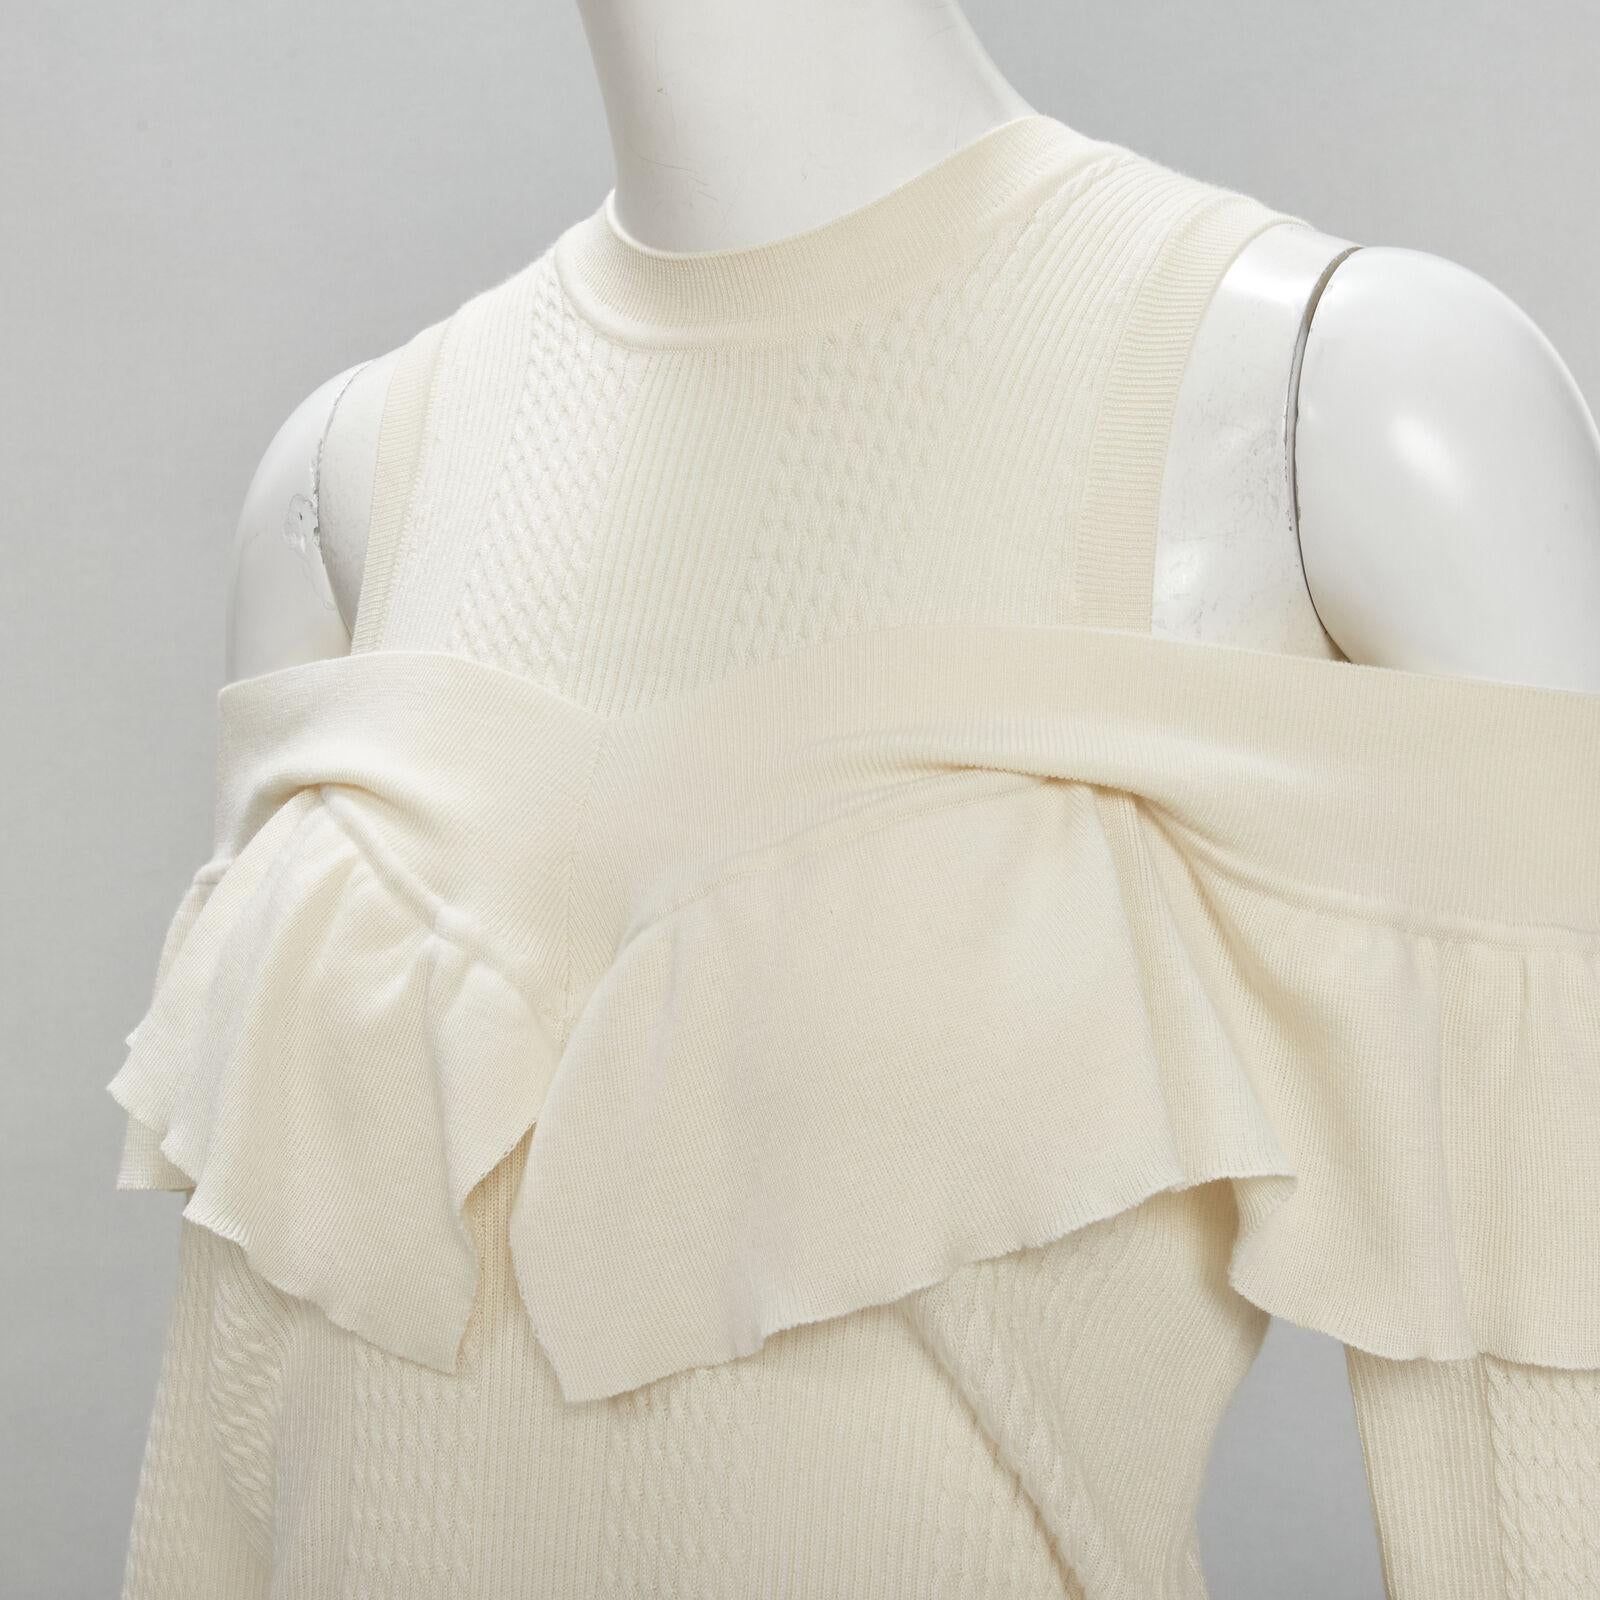 FENDI cream wool silk cashmere cold shoulder ruffle knit sweater IT44 M
Reference: KNLM/A00084
Brand: Fendi
Material: Wool, Blend
Color: Beige
Pattern: Solid
Extra Details: Faux layered cold shoulder design.
Made in: Italy

CONDITION:
Condition: